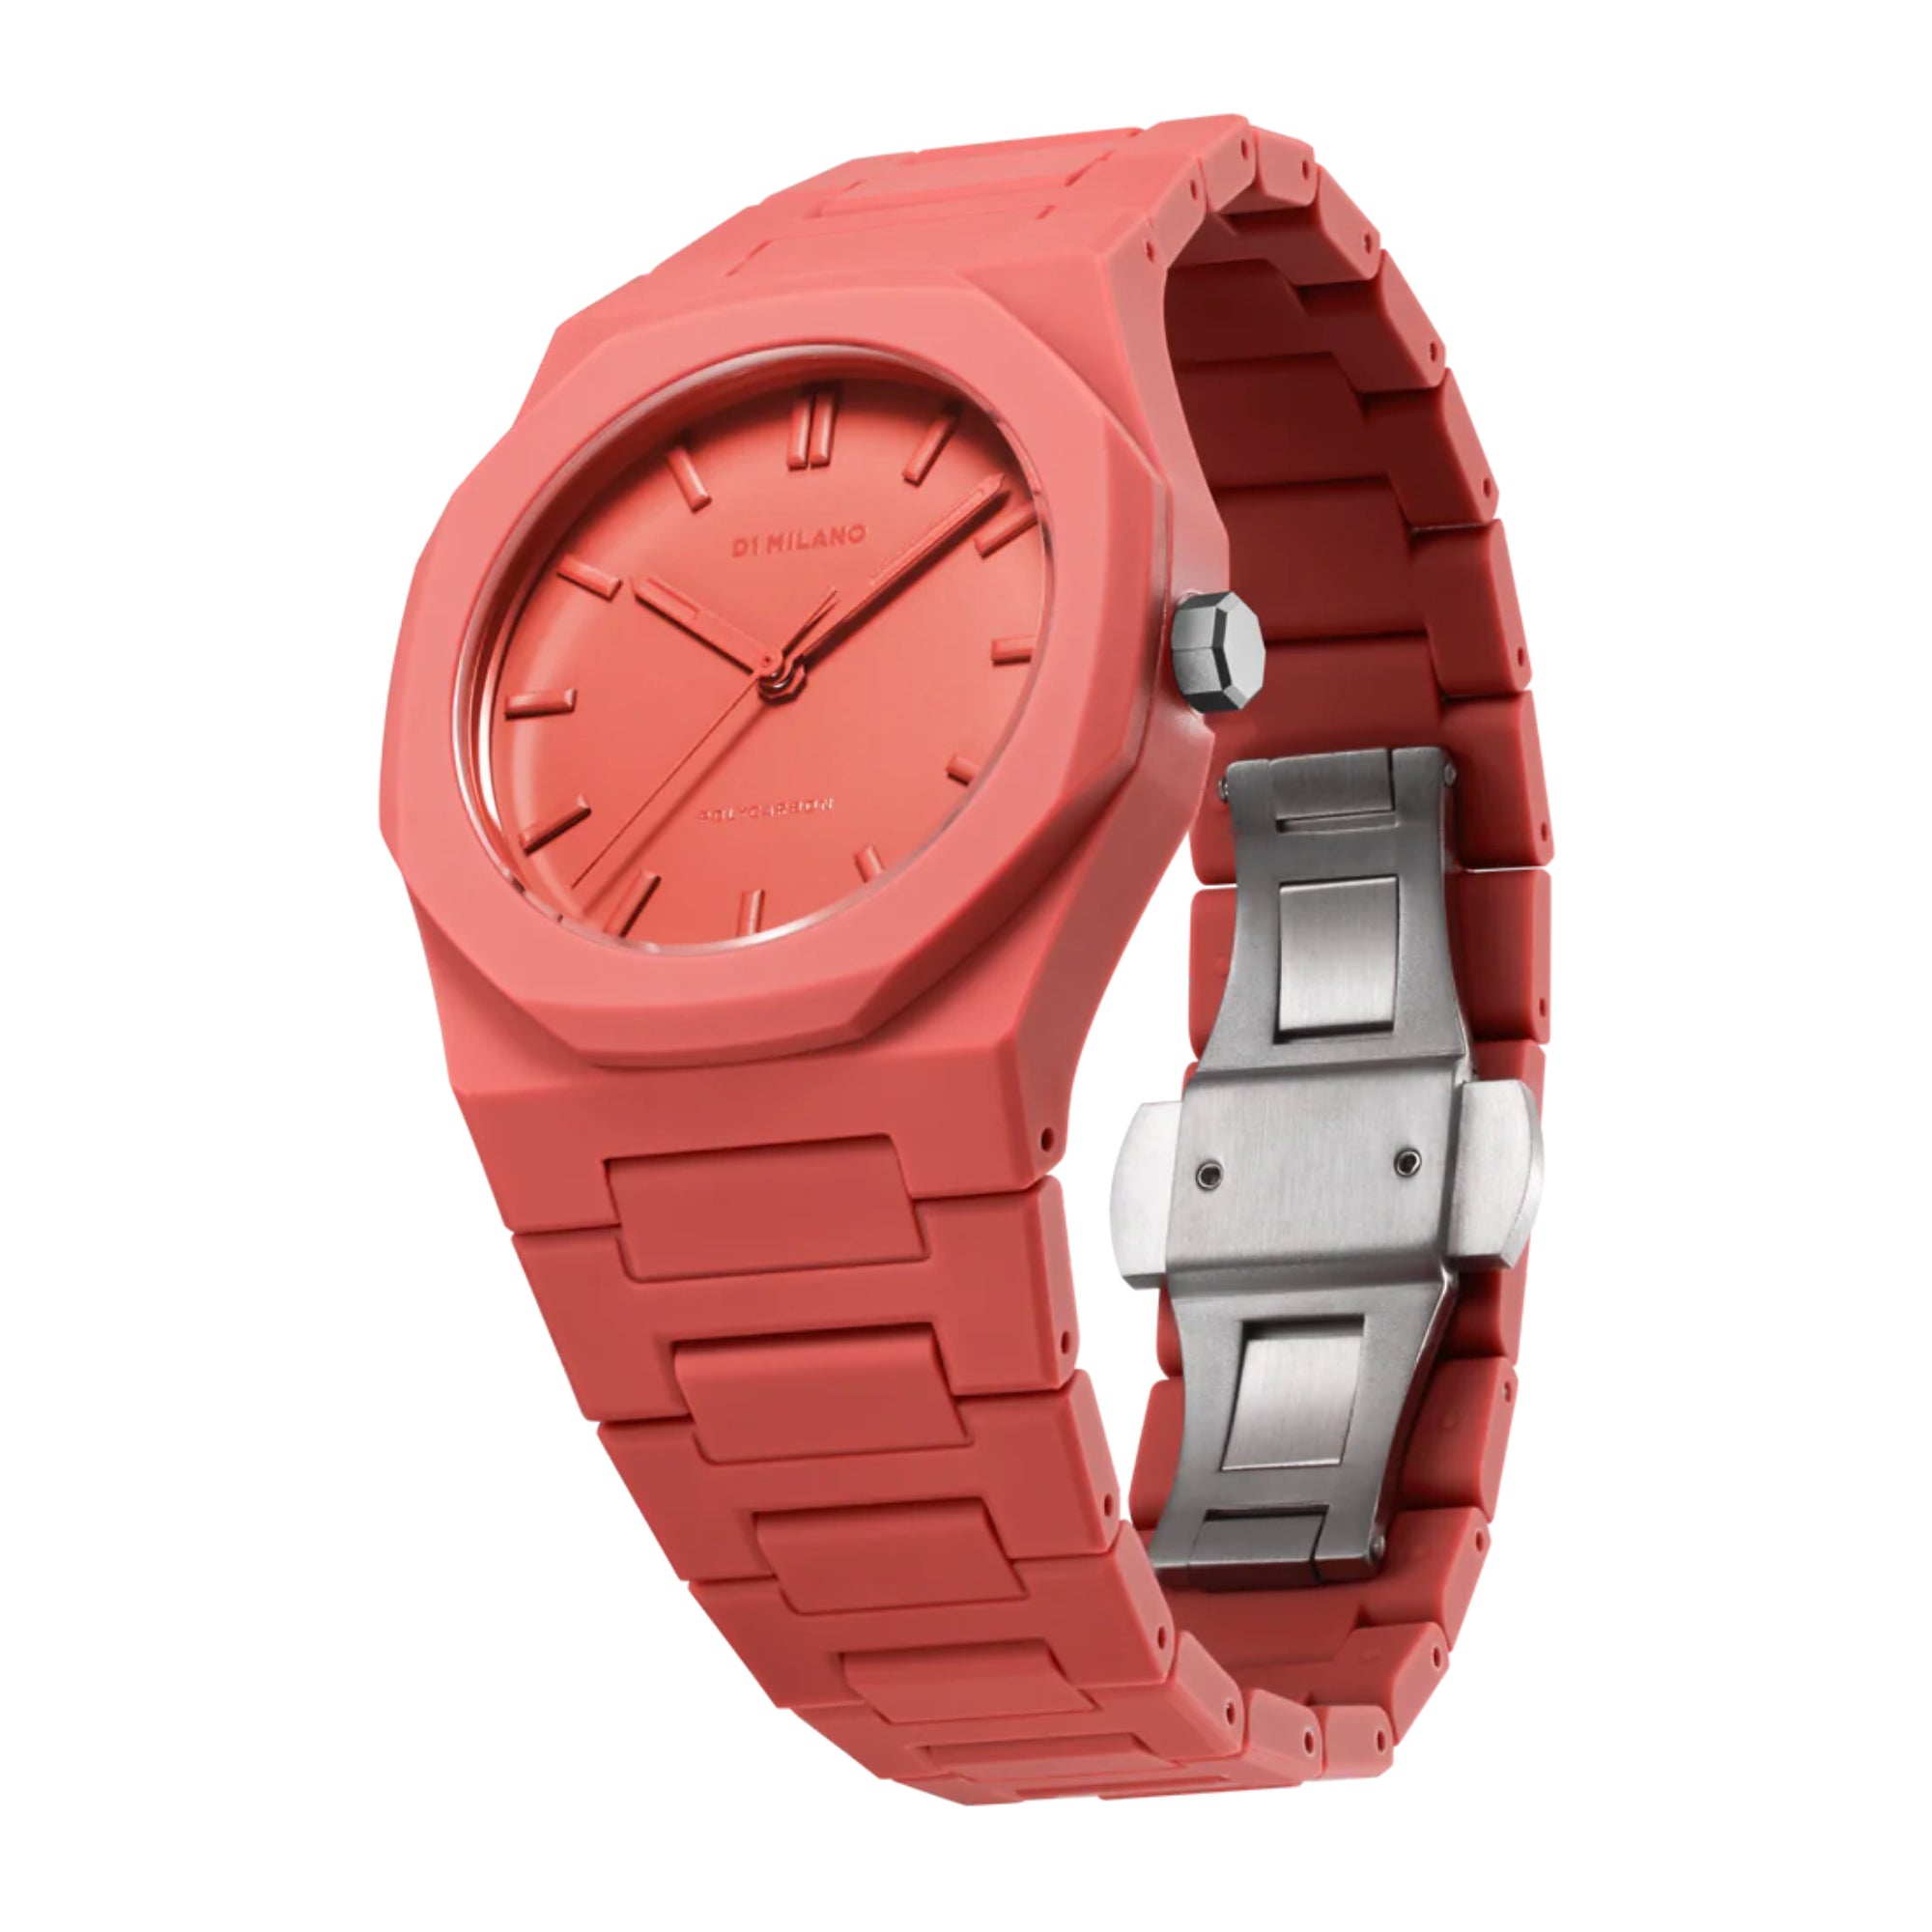 D1 Milano Watch for Men and Women, Quartz Movement, Red Dial - ML-0338